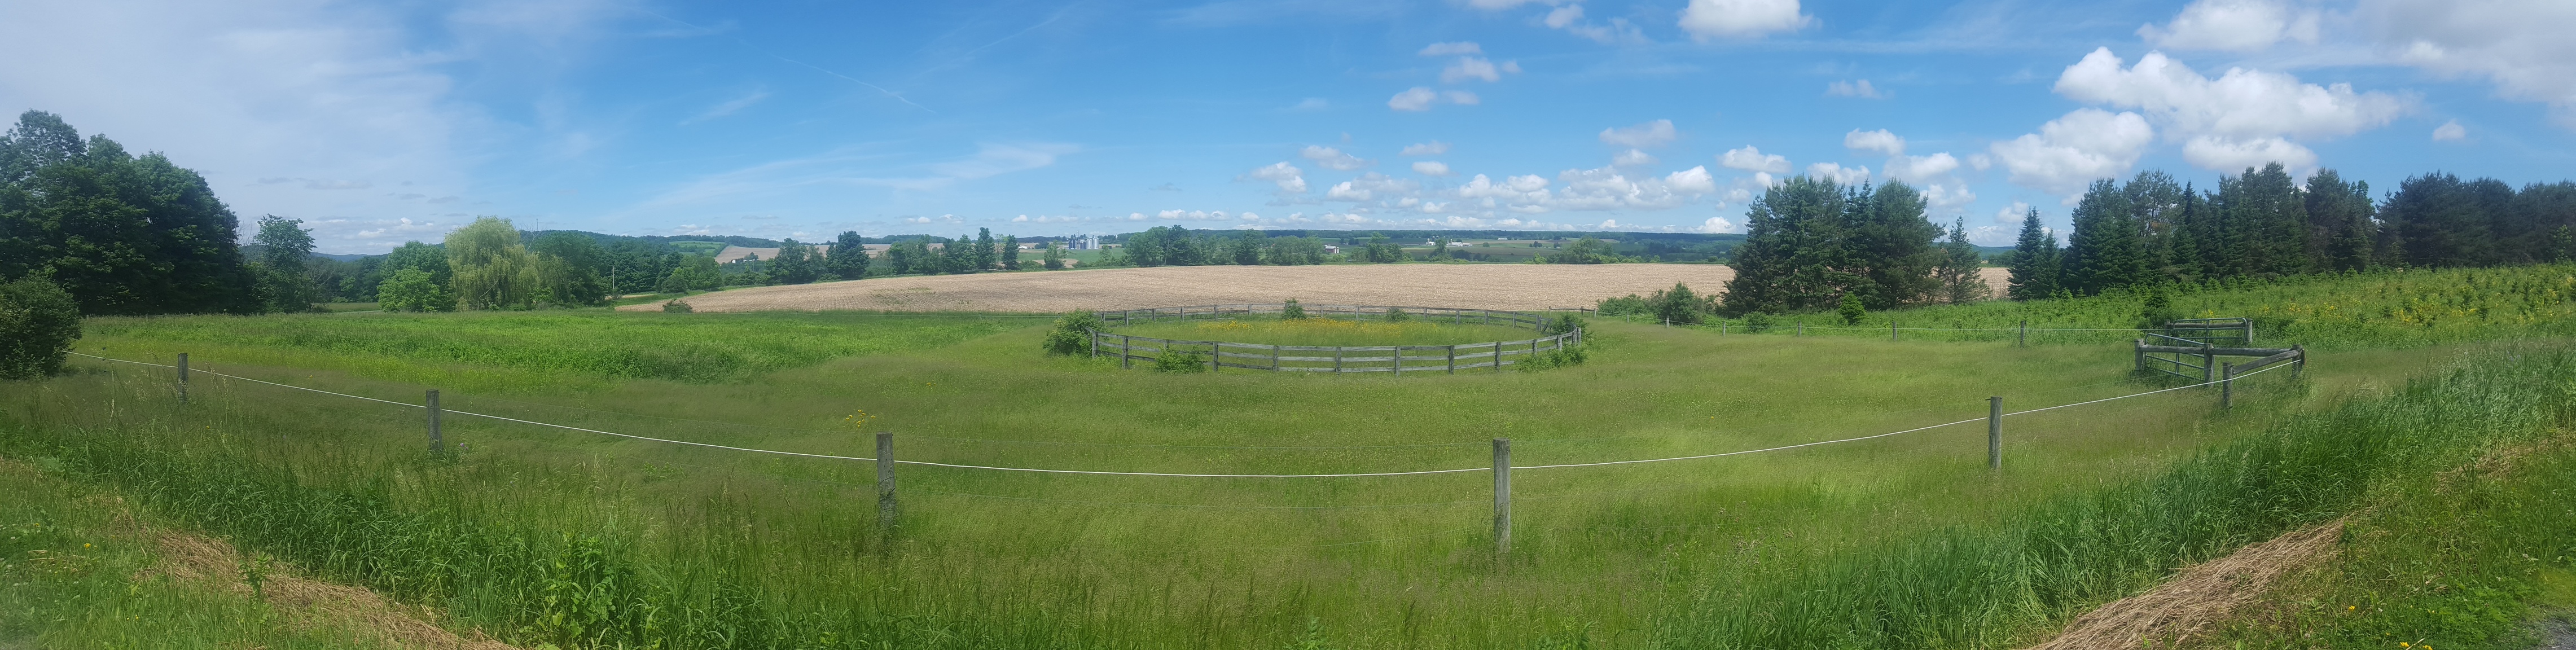 Pastures and fields under a blue sky in East Springfield, NY